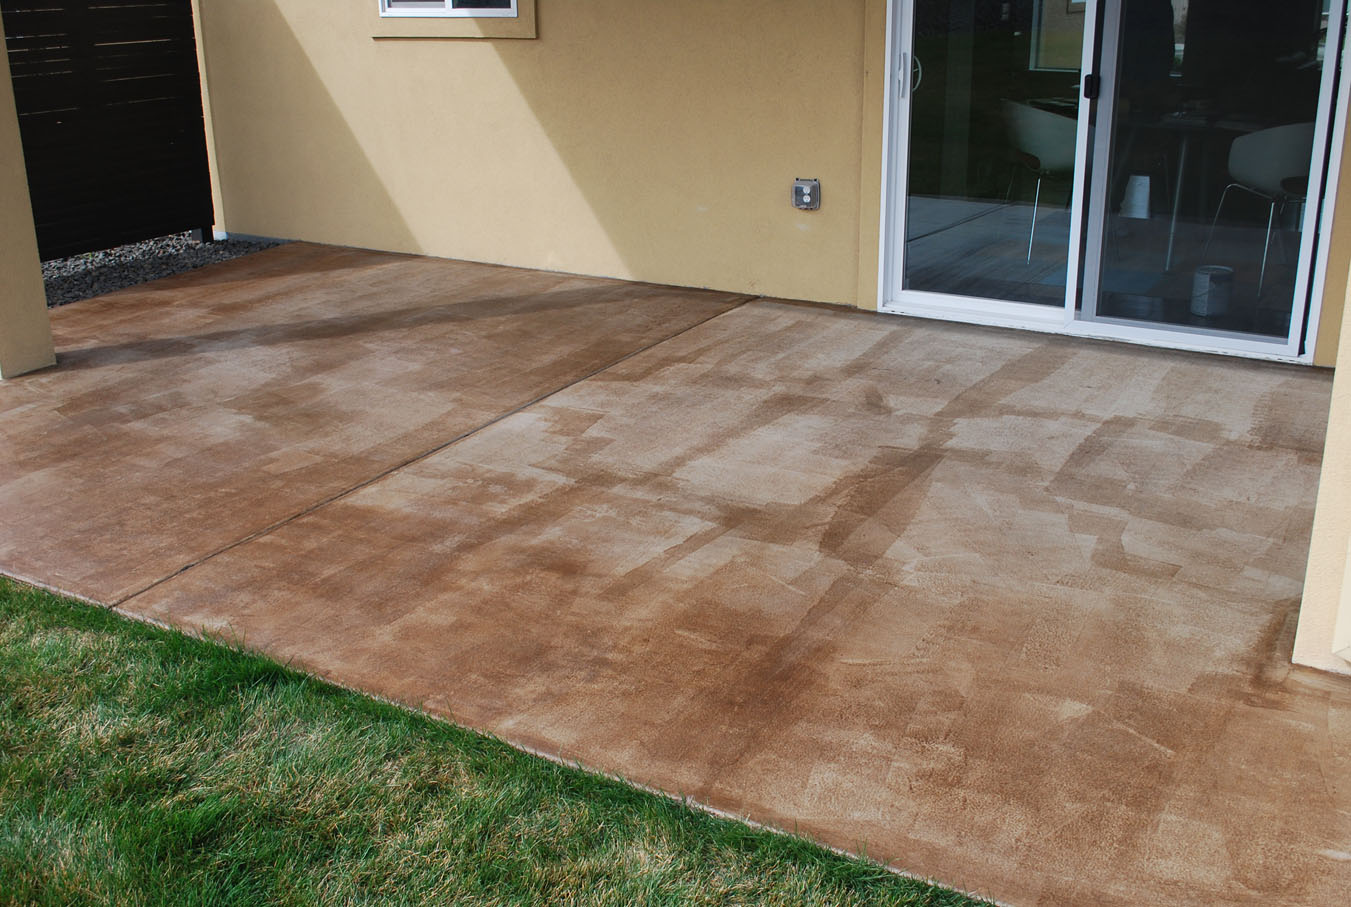 How To Stain Your Concrete Patio In Lakeside Ca?